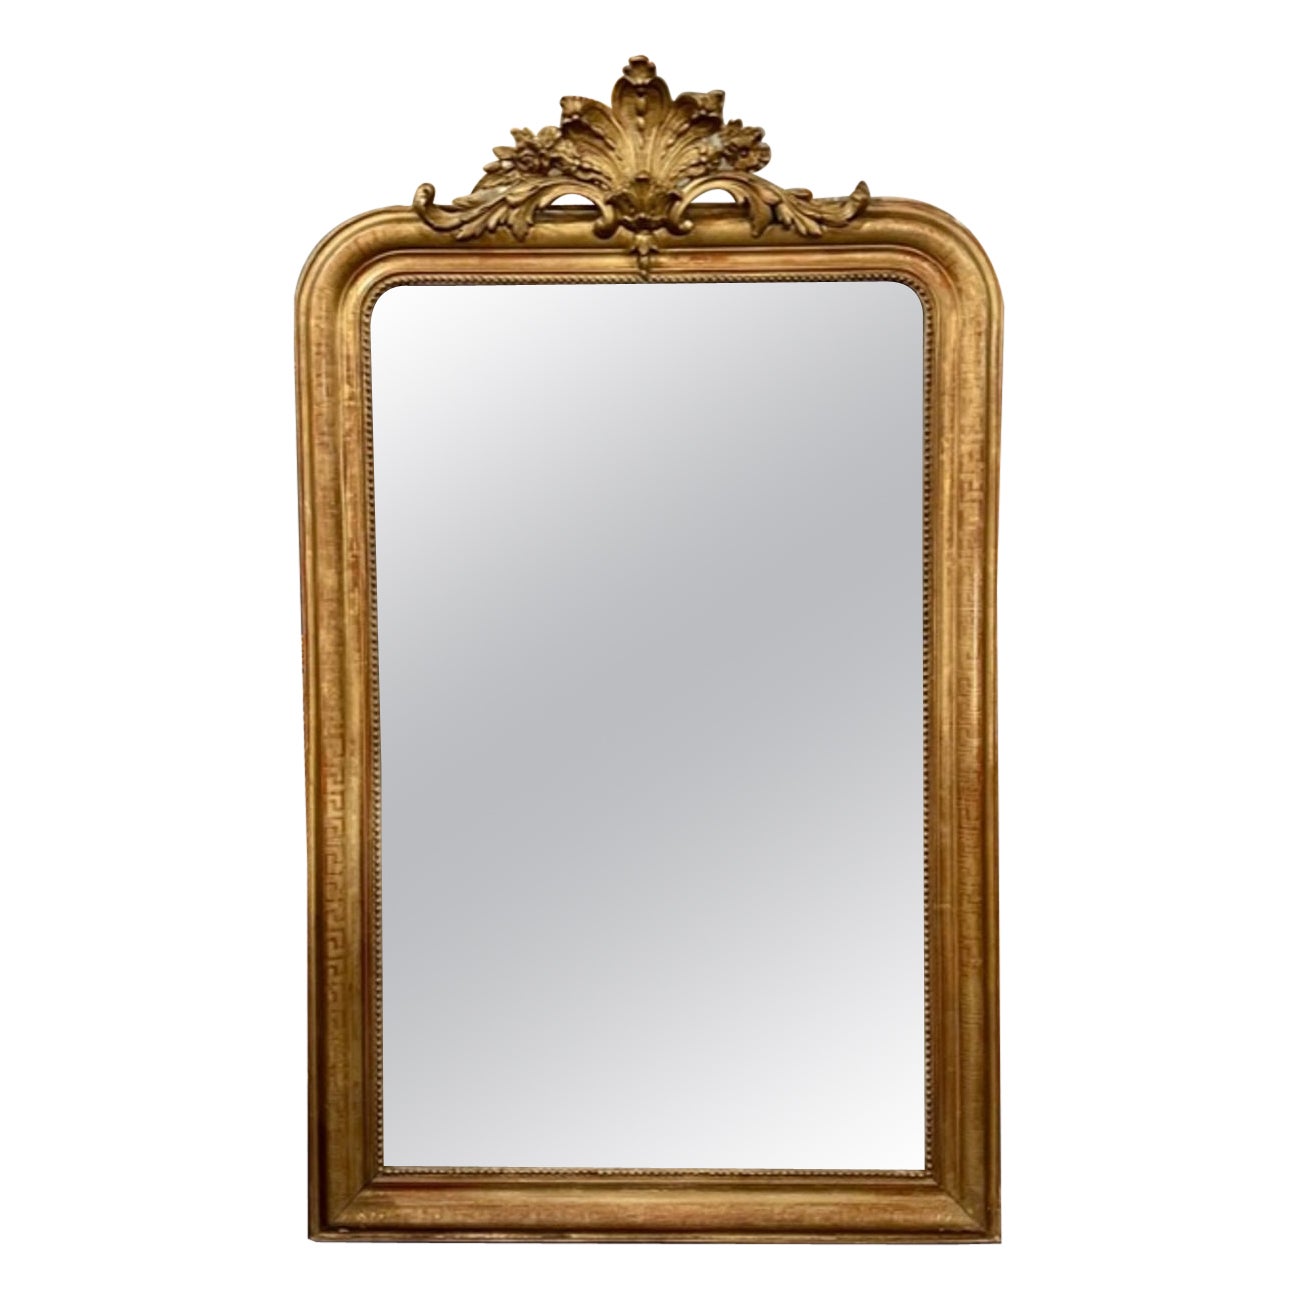 19th Century French Louis Philippe Mirror with Crest